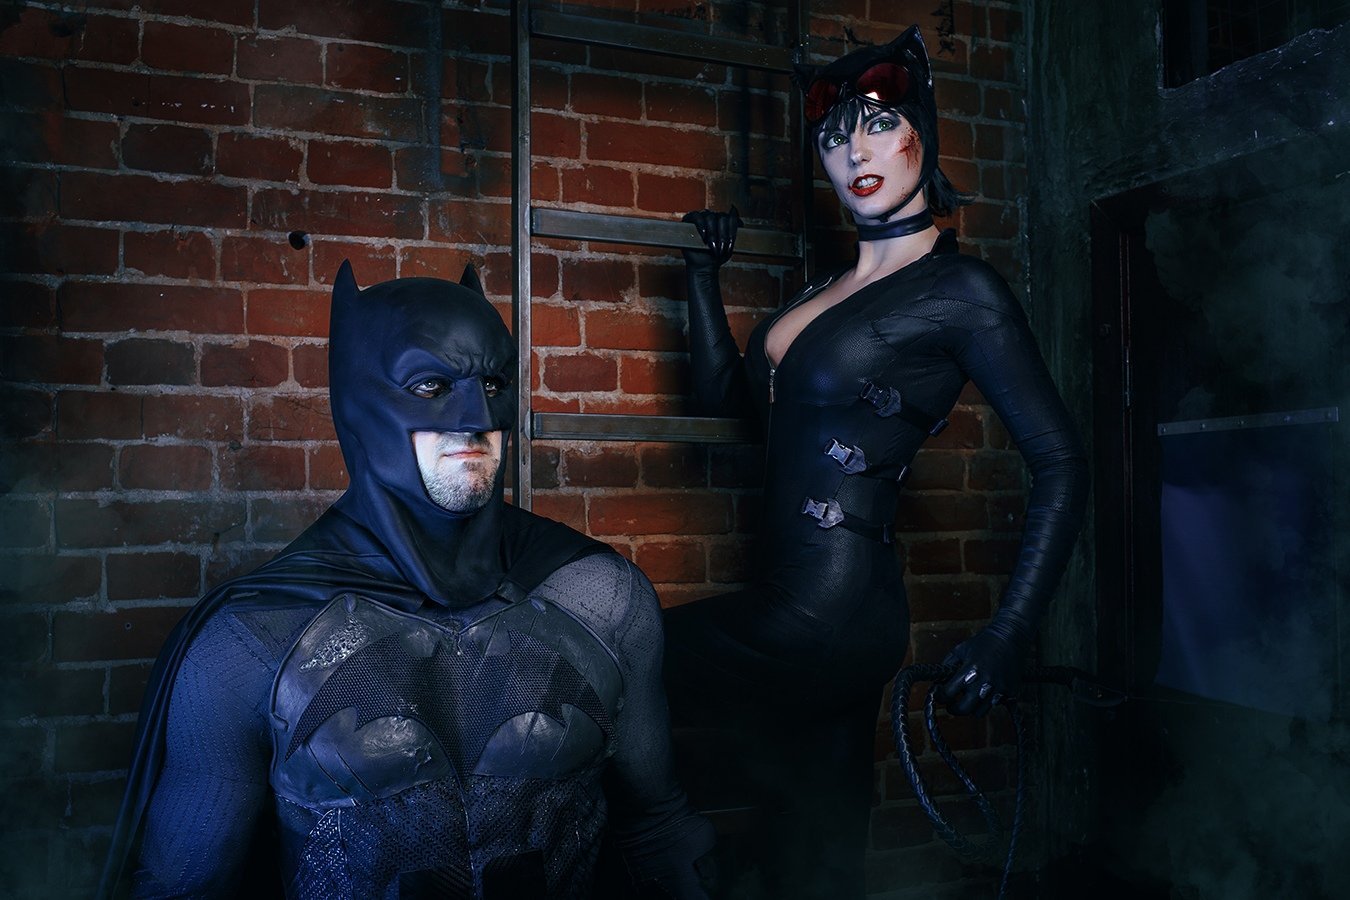 Monica sweetheart catwoman fucked fan images